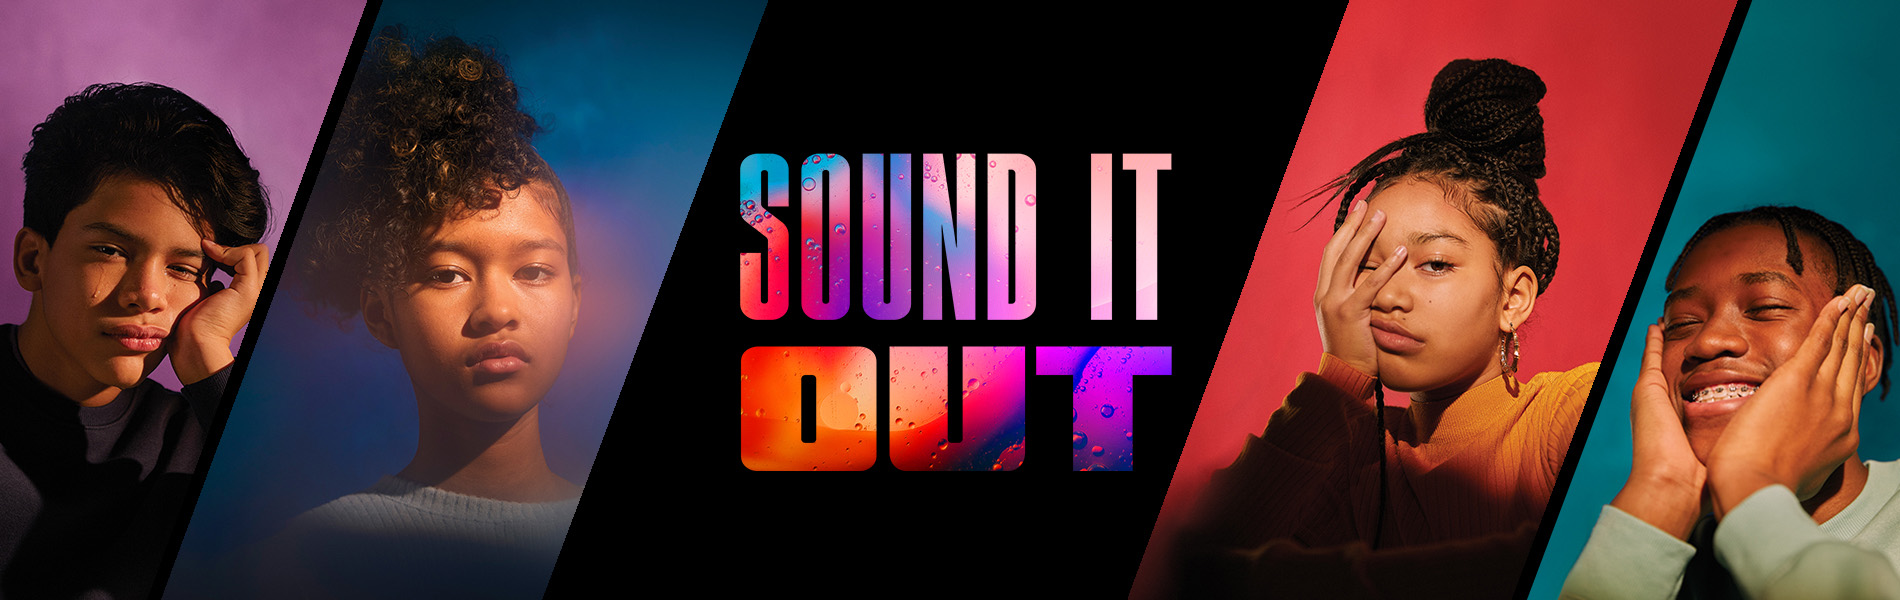 HERO image that says "Sound It Out" with 4 children on the banner